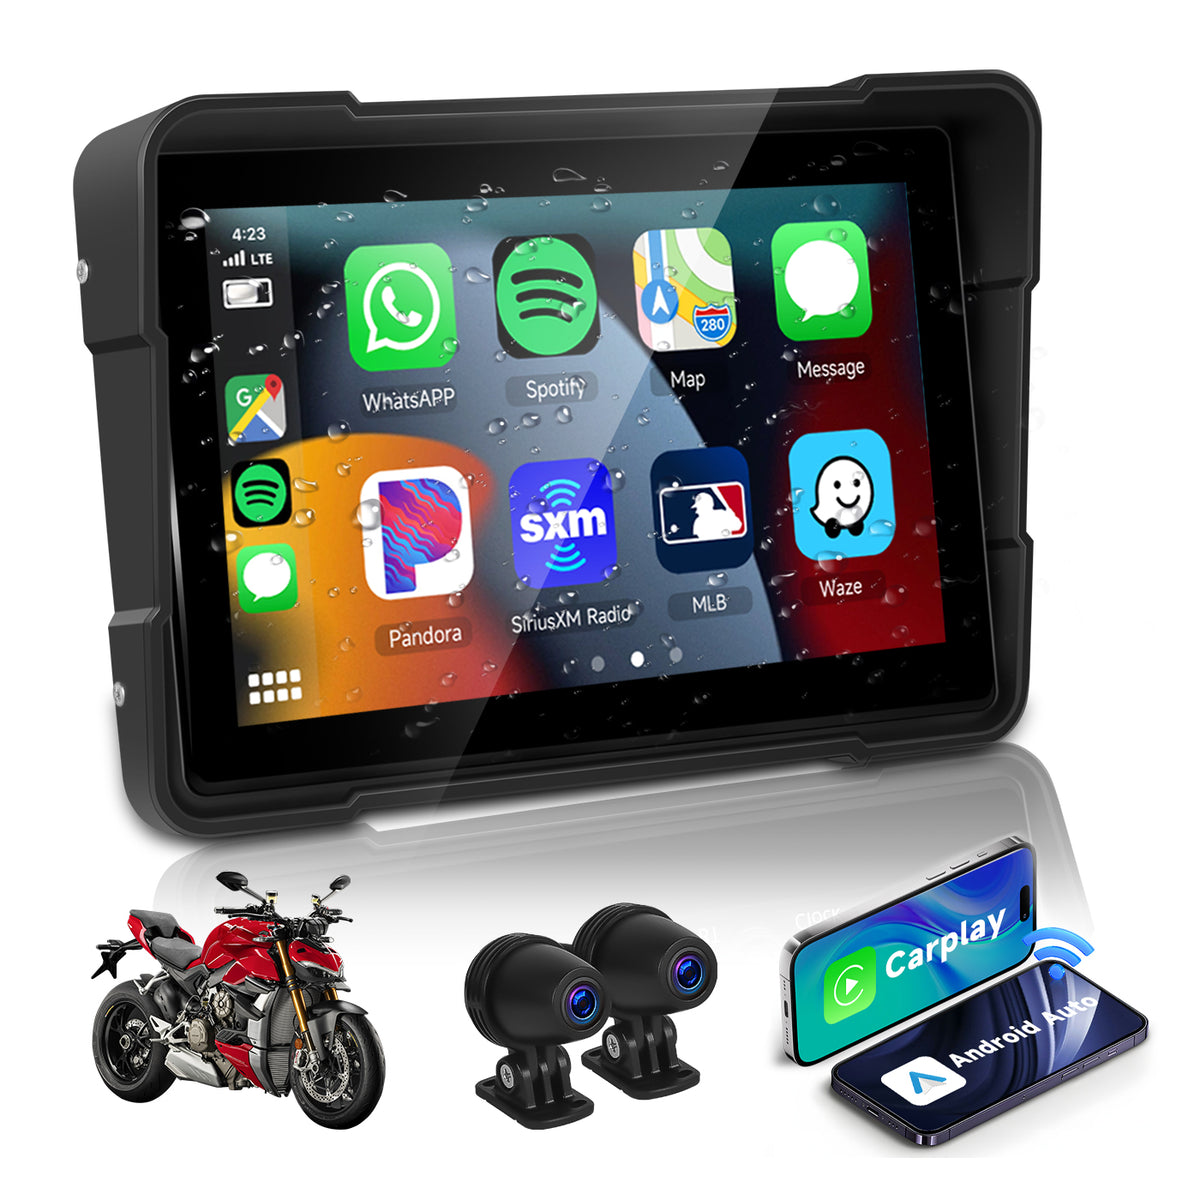 Podofo 5-inch Motorcycle Carplay Wireless Android Auto Screen IP67 Waterproof screen, Dual Bluetooth system, Support DVR Two Cameras